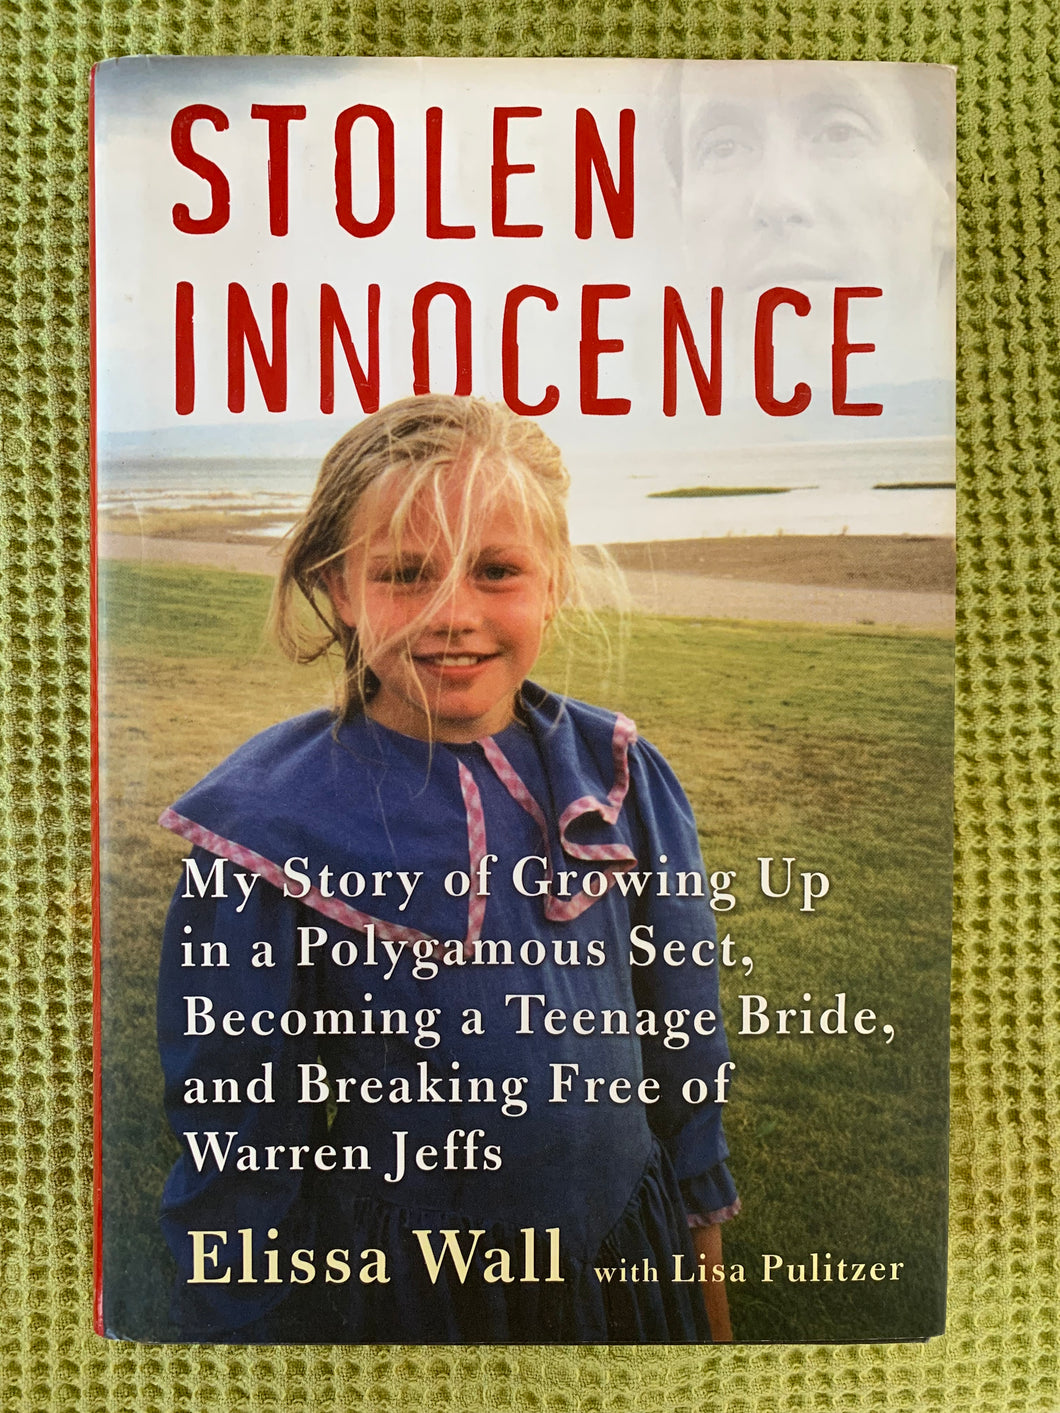 Stolen Innocence: My Story of Growing Up In a Polygamous Sect, Becoming a Teenage Bride, and Breaking Free of Warren Jeffs